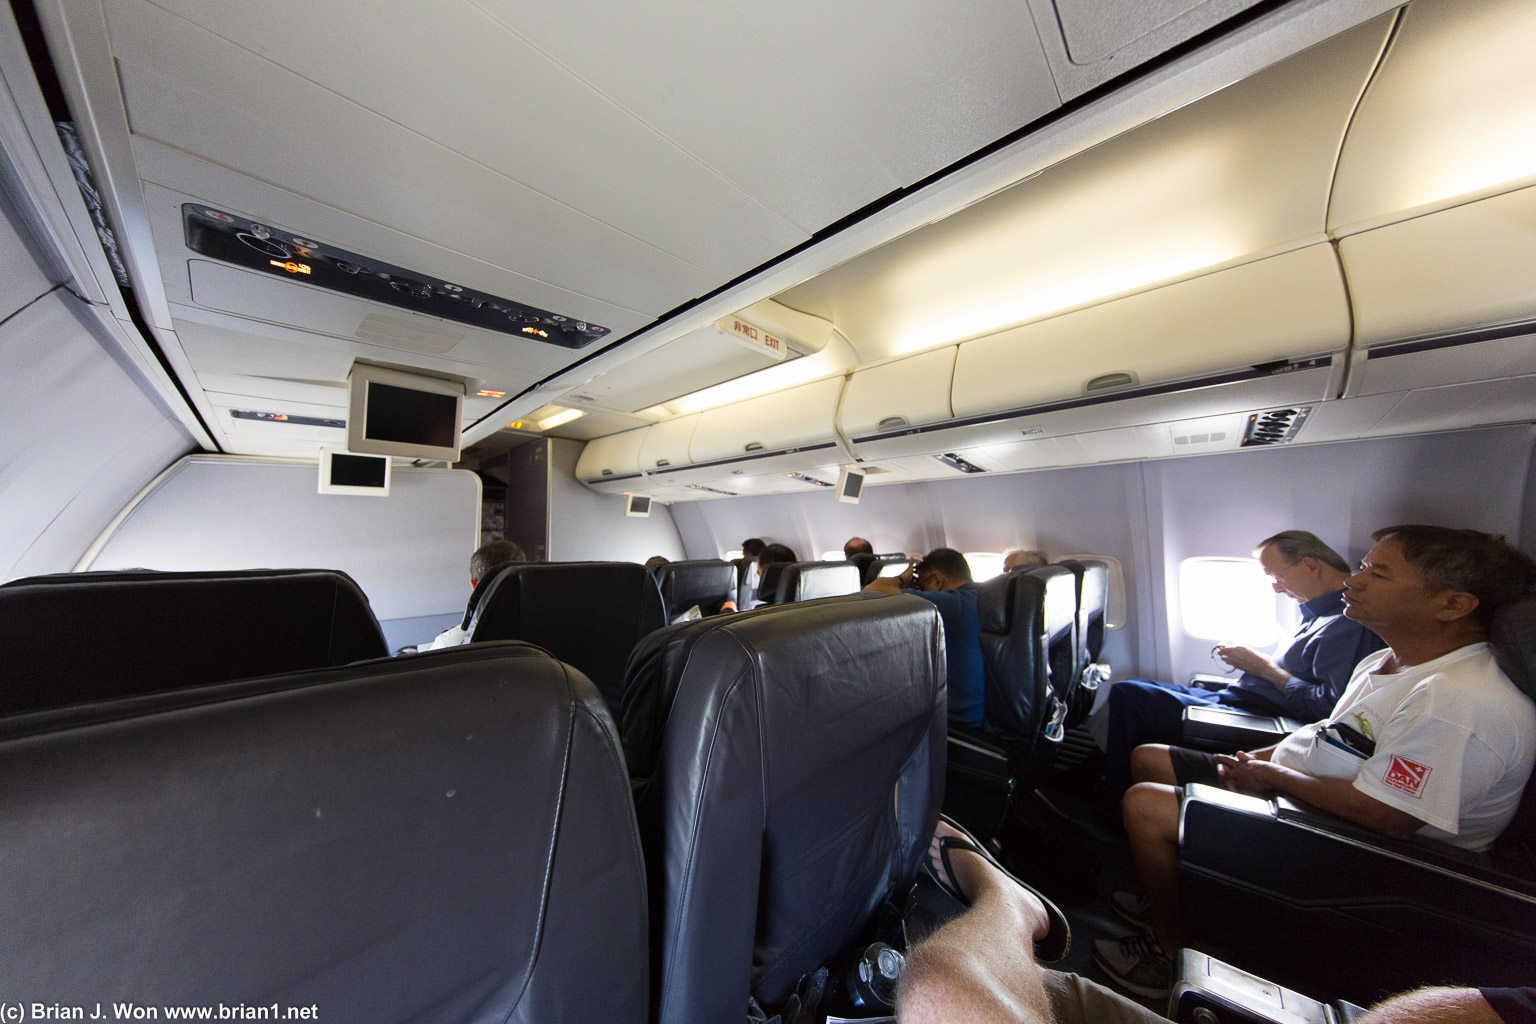 First class on this United 737-800 v4 WL Micronesia is a little tight with spare parts, spare pilots...